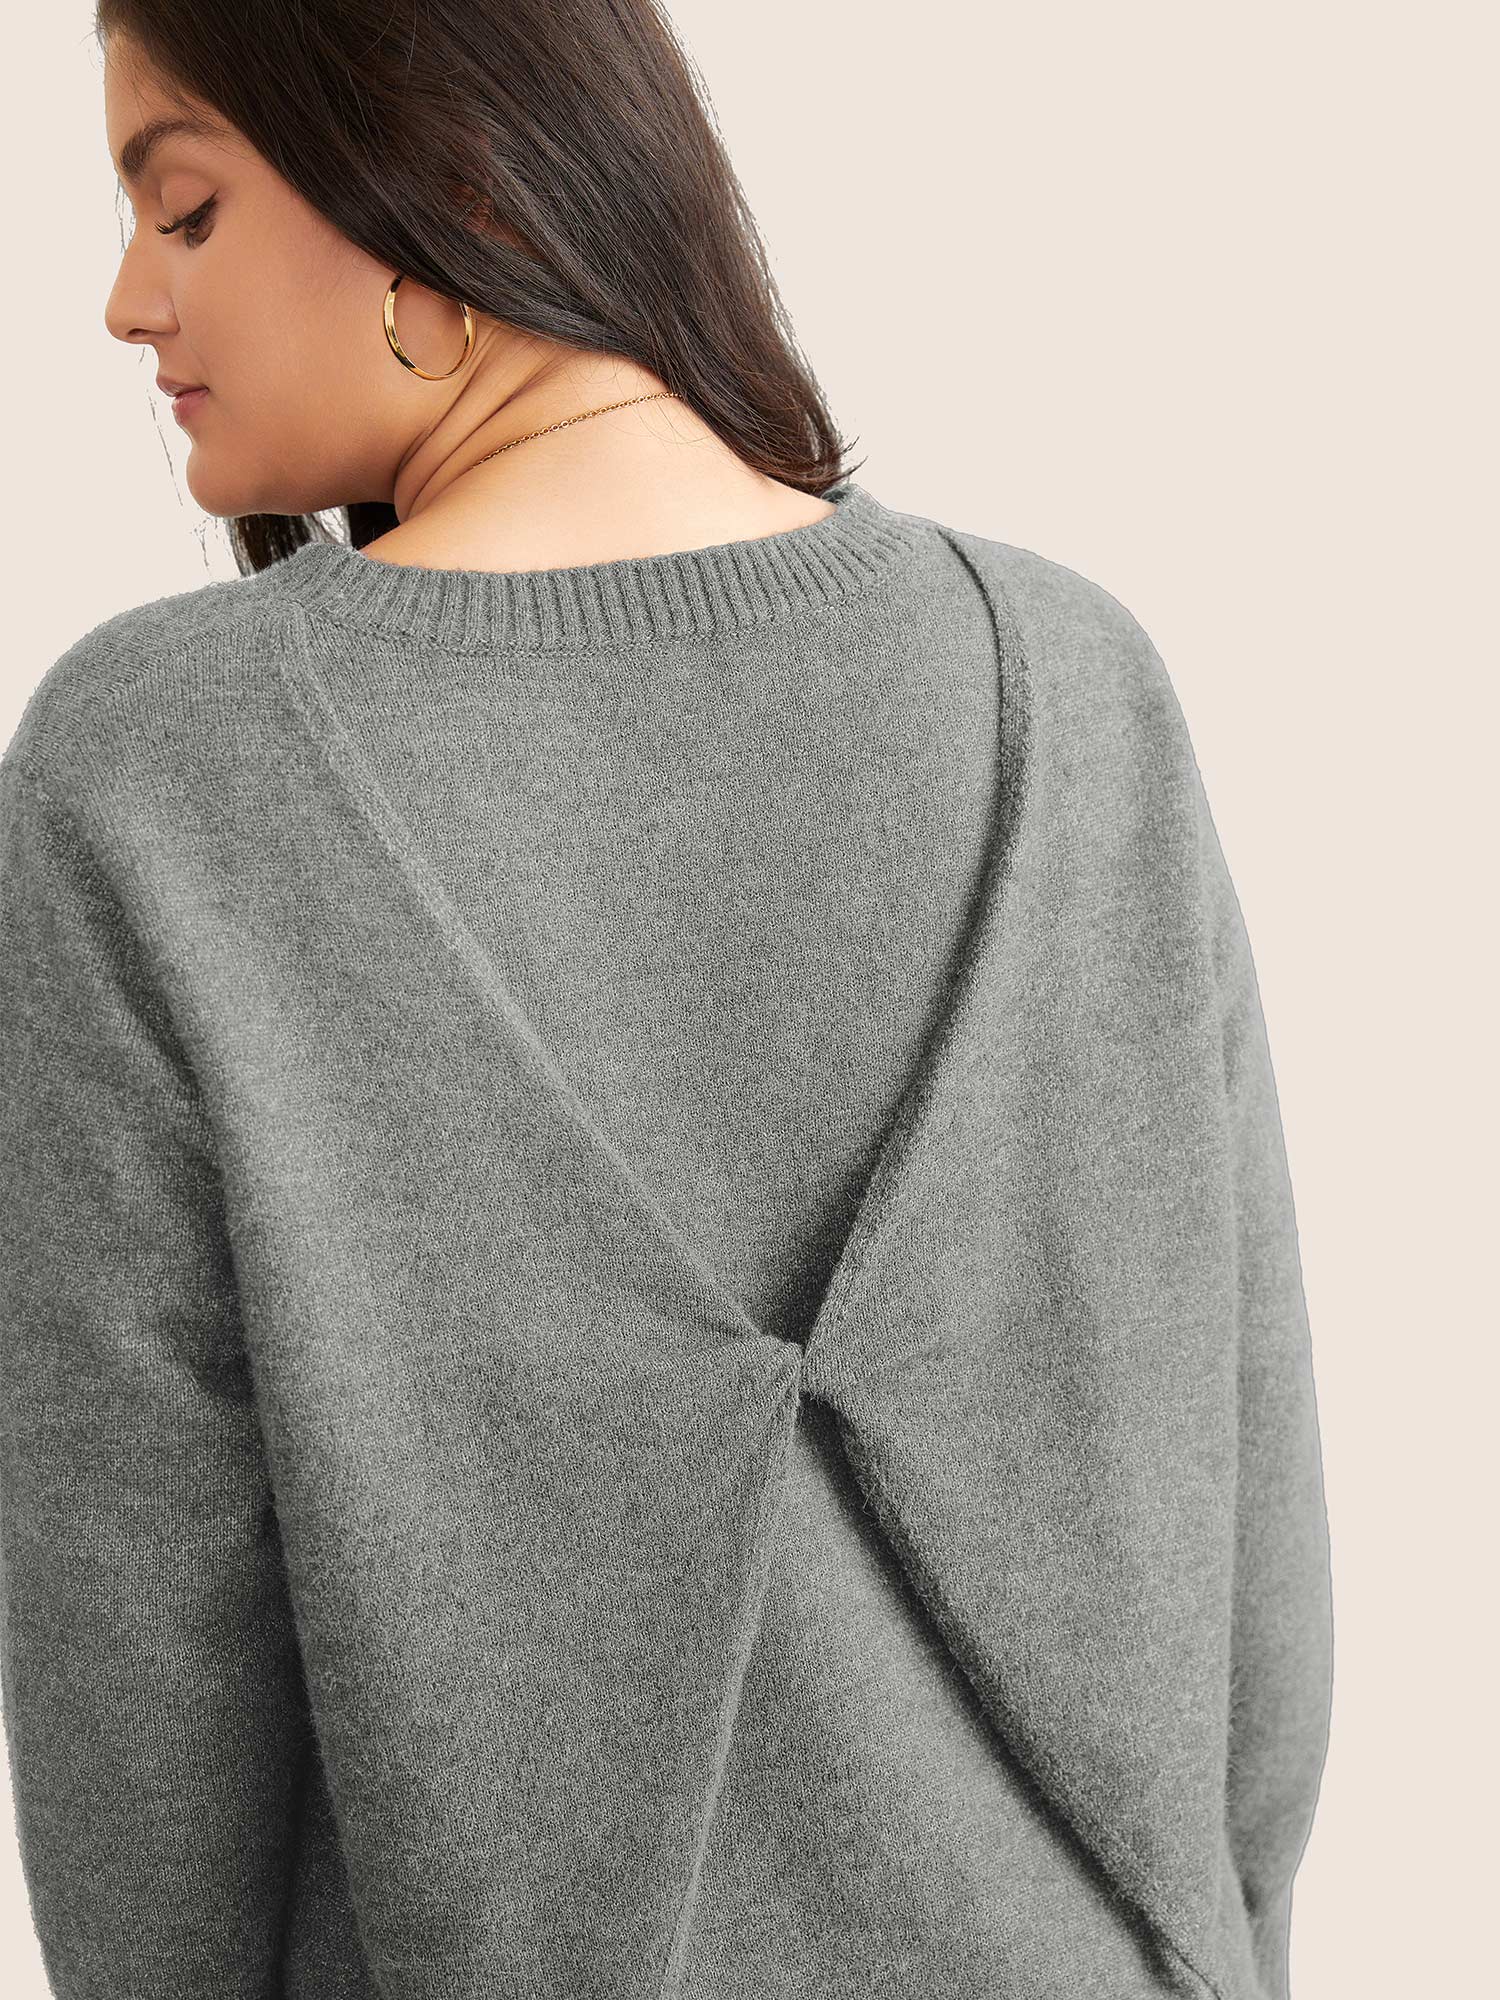 

Plus Size Supersoft Essentials Solid Heather Twist Back Pullover DarkGray Women Casual Long Sleeve Round Neck Everyday Pullovers BloomChic